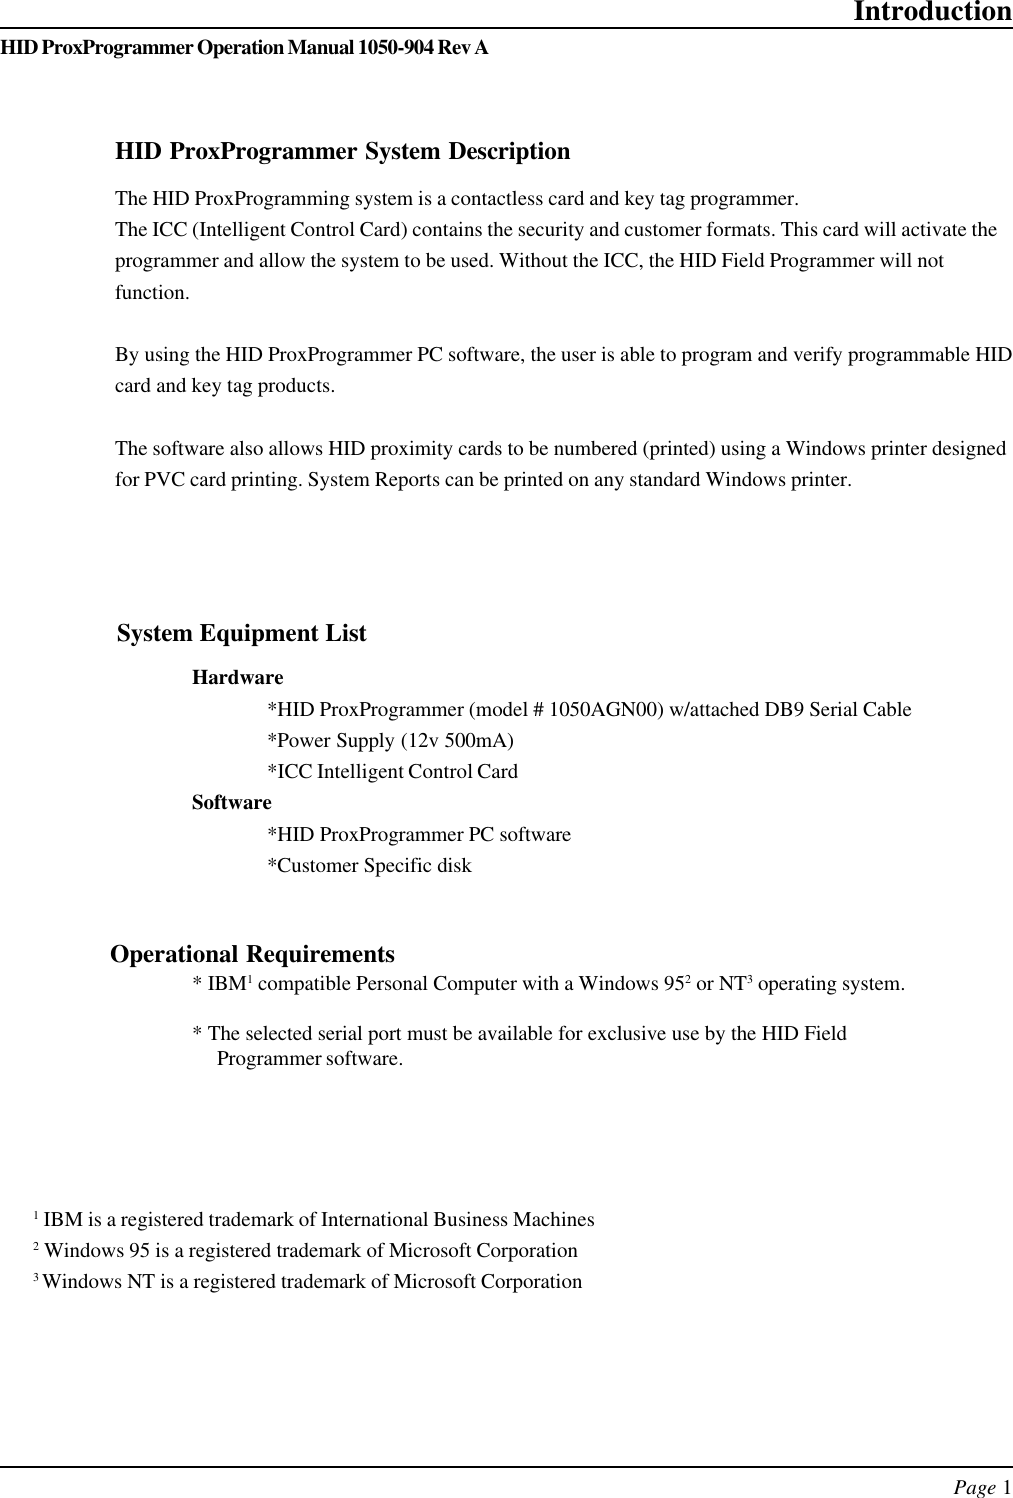 Page 1HID ProxProgrammer Operation Manual 1050-904 Rev AIntroductionHardware*HID ProxProgrammer (model # 1050AGN00) w/attached DB9 Serial Cable*Power Supply (12v 500mA)*ICC Intelligent Control CardSoftware*HID ProxProgrammer PC software*Customer Specific disk* IBM1 compatible Personal Computer with a Windows 952 or NT3 operating system.* The selected serial port must be available for exclusive use by the HID FieldProgrammer software.Operational RequirementsSystem Equipment ListHID ProxProgrammer System DescriptionThe HID ProxProgramming system is a contactless card and key tag programmer.The ICC (Intelligent Control Card) contains the security and customer formats. This card will activate theprogrammer and allow the system to be used. Without the ICC, the HID Field Programmer will notfunction.By using the HID ProxProgrammer PC software, the user is able to program and verify programmable HIDcard and key tag products.The software also allows HID proximity cards to be numbered (printed) using a Windows printer designedfor PVC card printing. System Reports can be printed on any standard Windows printer.1 IBM is a registered trademark of International Business Machines2 Windows 95 is a registered trademark of Microsoft Corporation3 Windows NT is a registered trademark of Microsoft Corporation